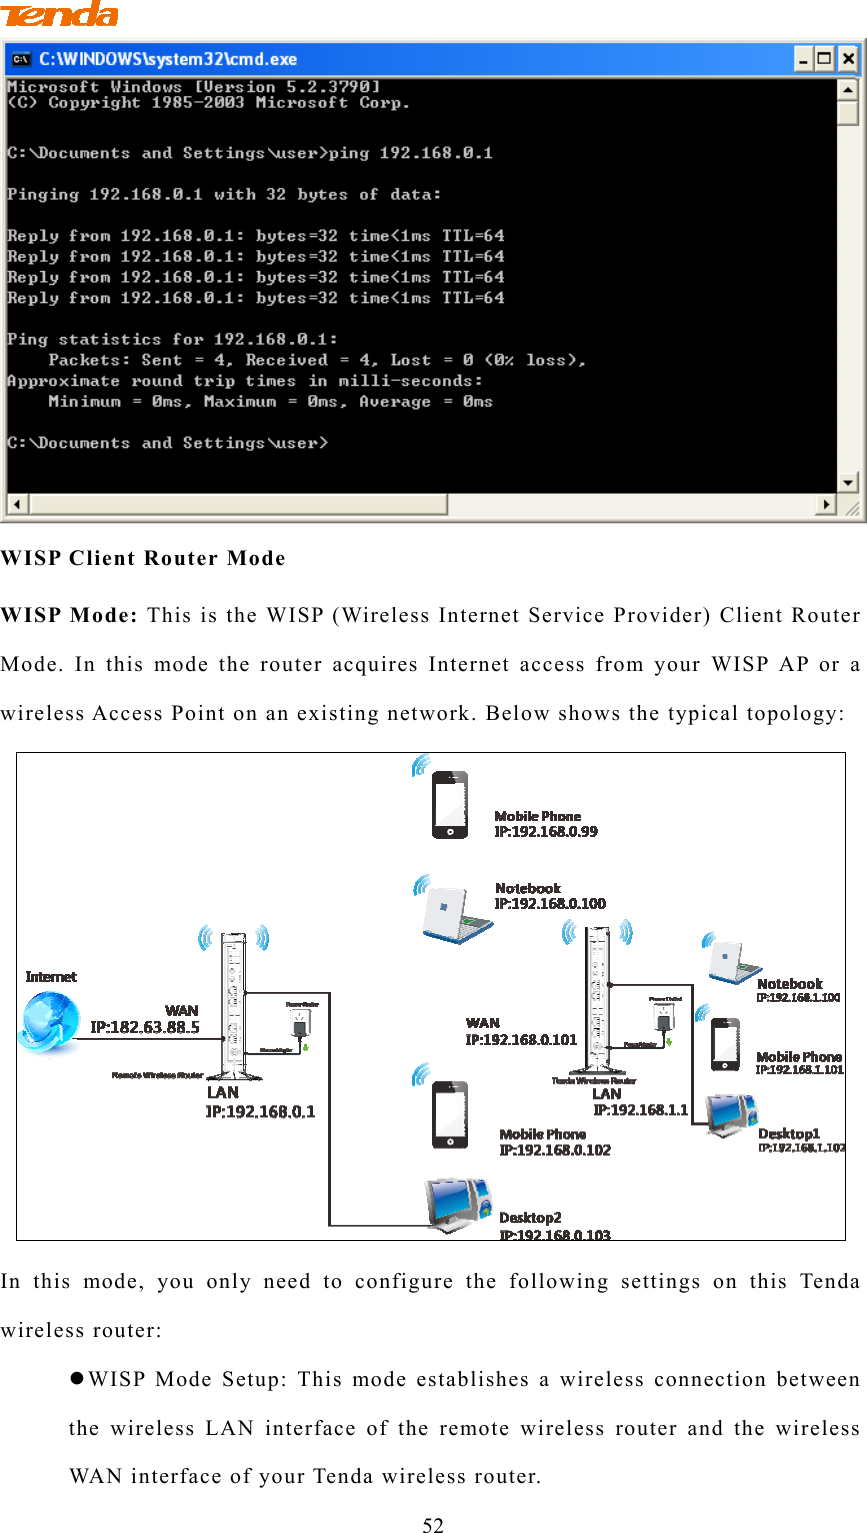                                        52  WISP Client Router Mode WISP Mode: This is the WISP (Wireless Internet Service Provider) Client Router Mode. In this mode the router acquires Internet access from your WISP AP or a wireless Access Point on an existing network. Below shows the typical topology:  In this mode, you only need to configure the following settings on this Tenda wireless router:  WISP Mode Setup: This mode establishes a wireless connection between the wireless LAN interface of the remote wireless router and the wireless WAN interface of your Tenda wireless router.   